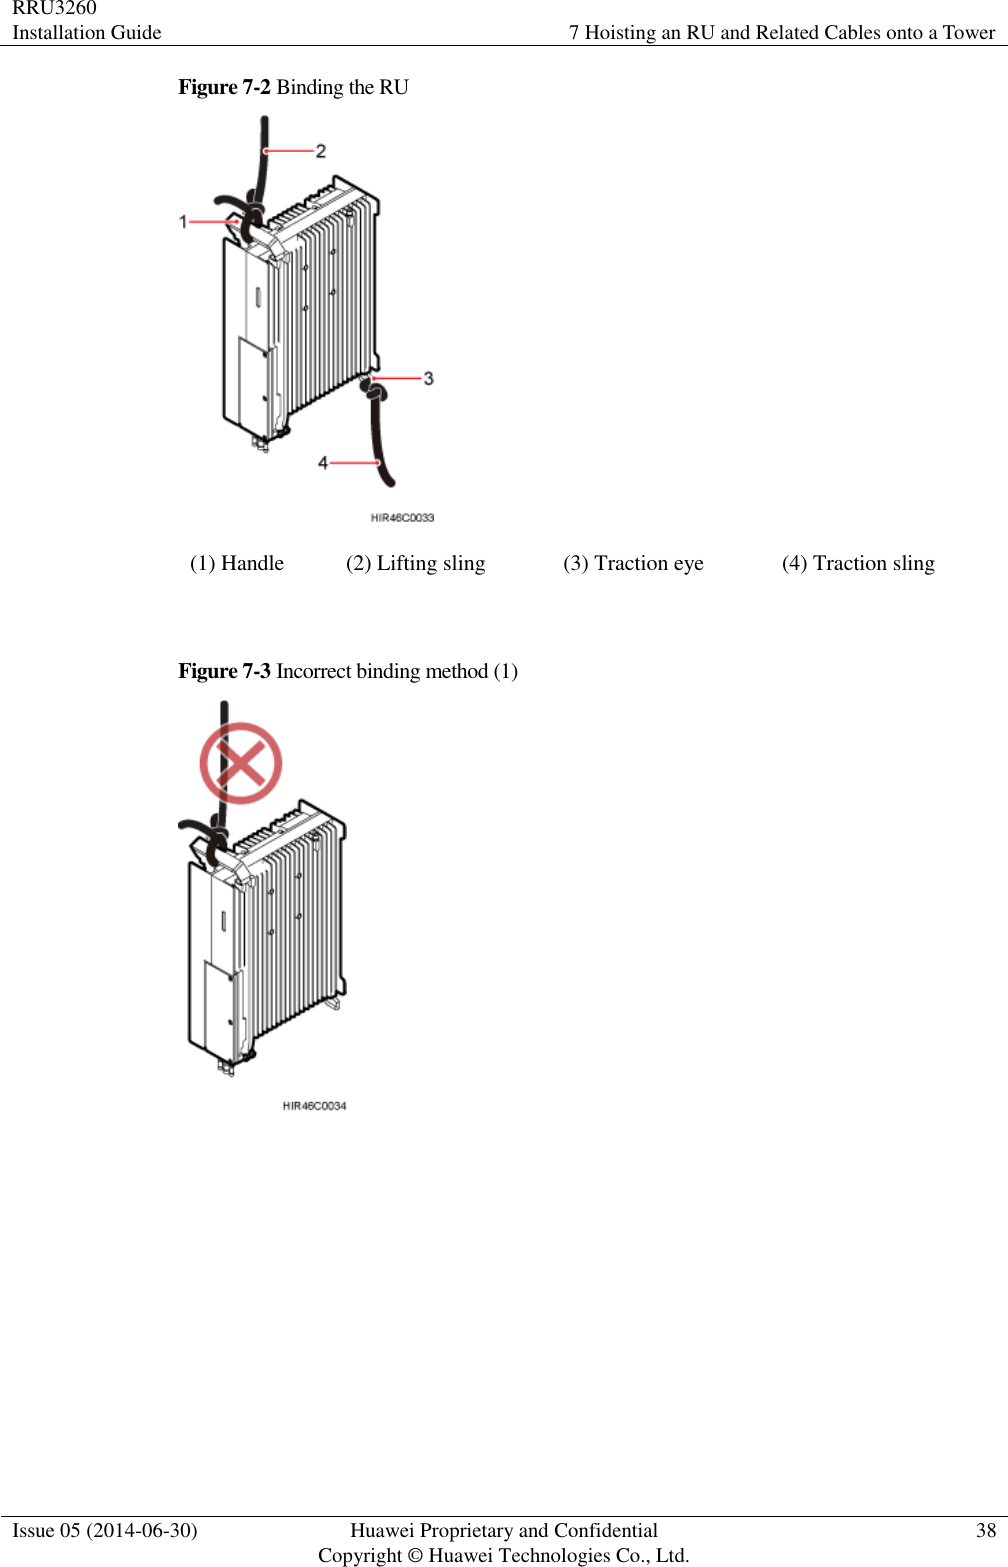 RRU3260 Installation Guide 7 Hoisting an RU and Related Cables onto a Tower  Issue 05 (2014-06-30) Huawei Proprietary and Confidential                                     Copyright © Huawei Technologies Co., Ltd. 38  Figure 7-2 Binding the RU  (1) Handle (2) Lifting sling (3) Traction eye (4) Traction sling  Figure 7-3 Incorrect binding method (1)   